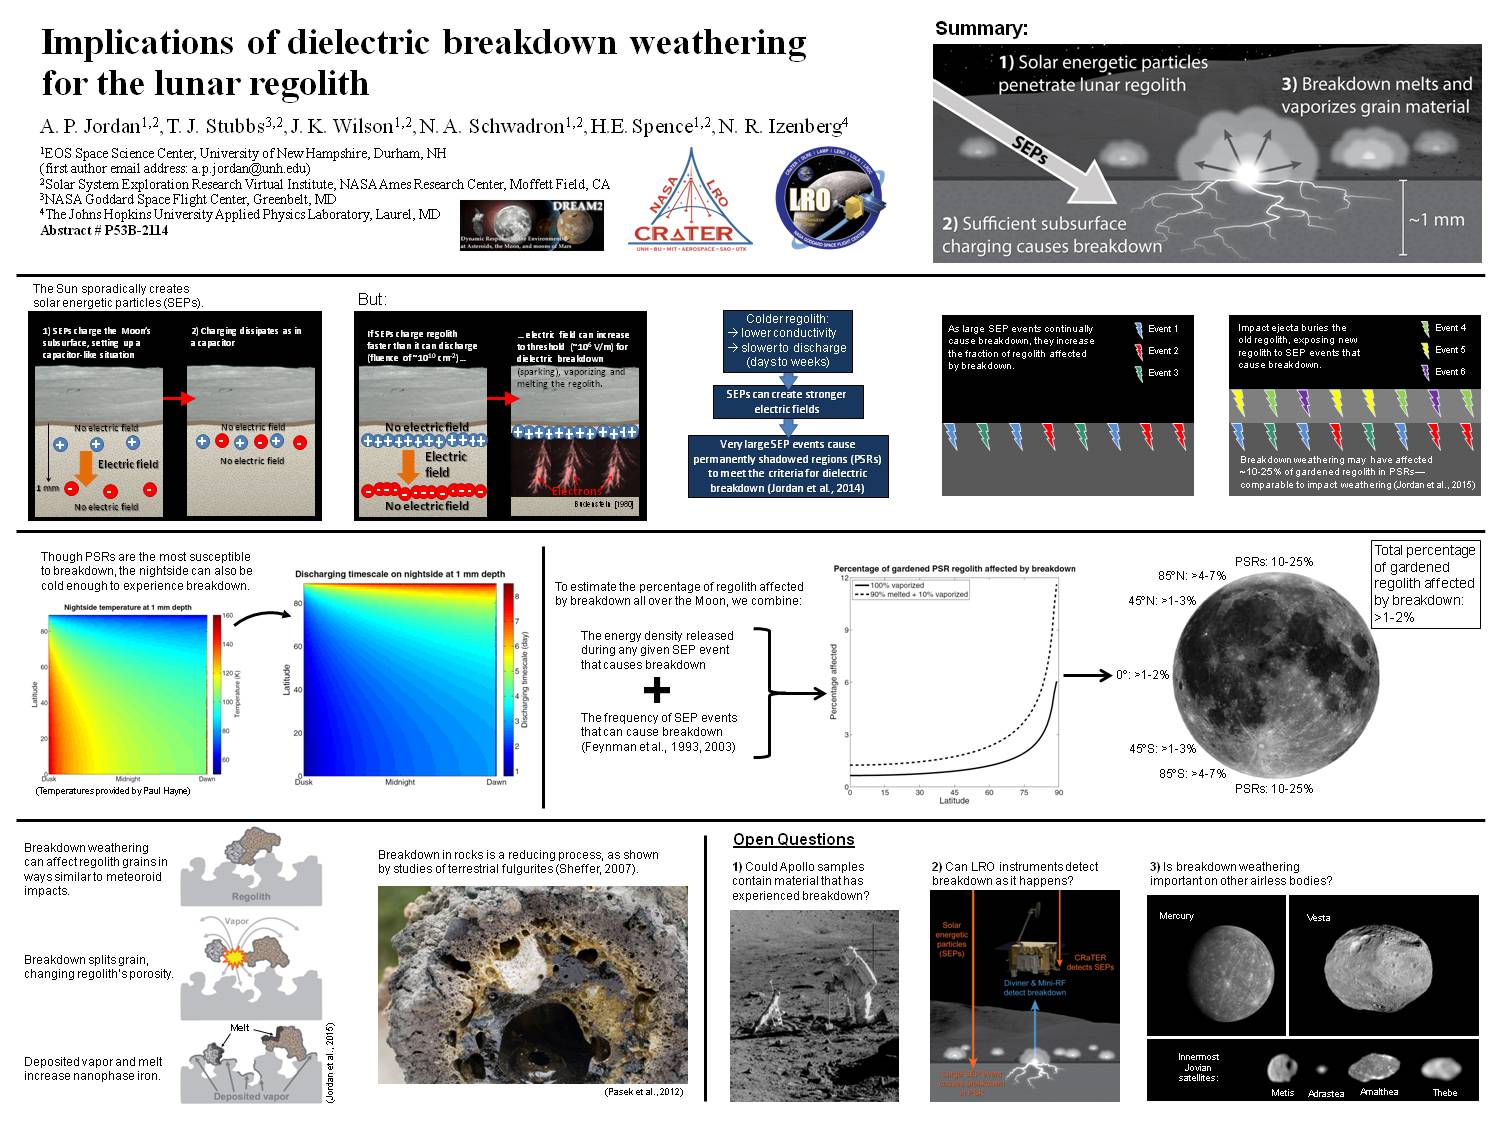 Implications Of Dielectric Breakdown Weathering For The Lunar Regolith by api44